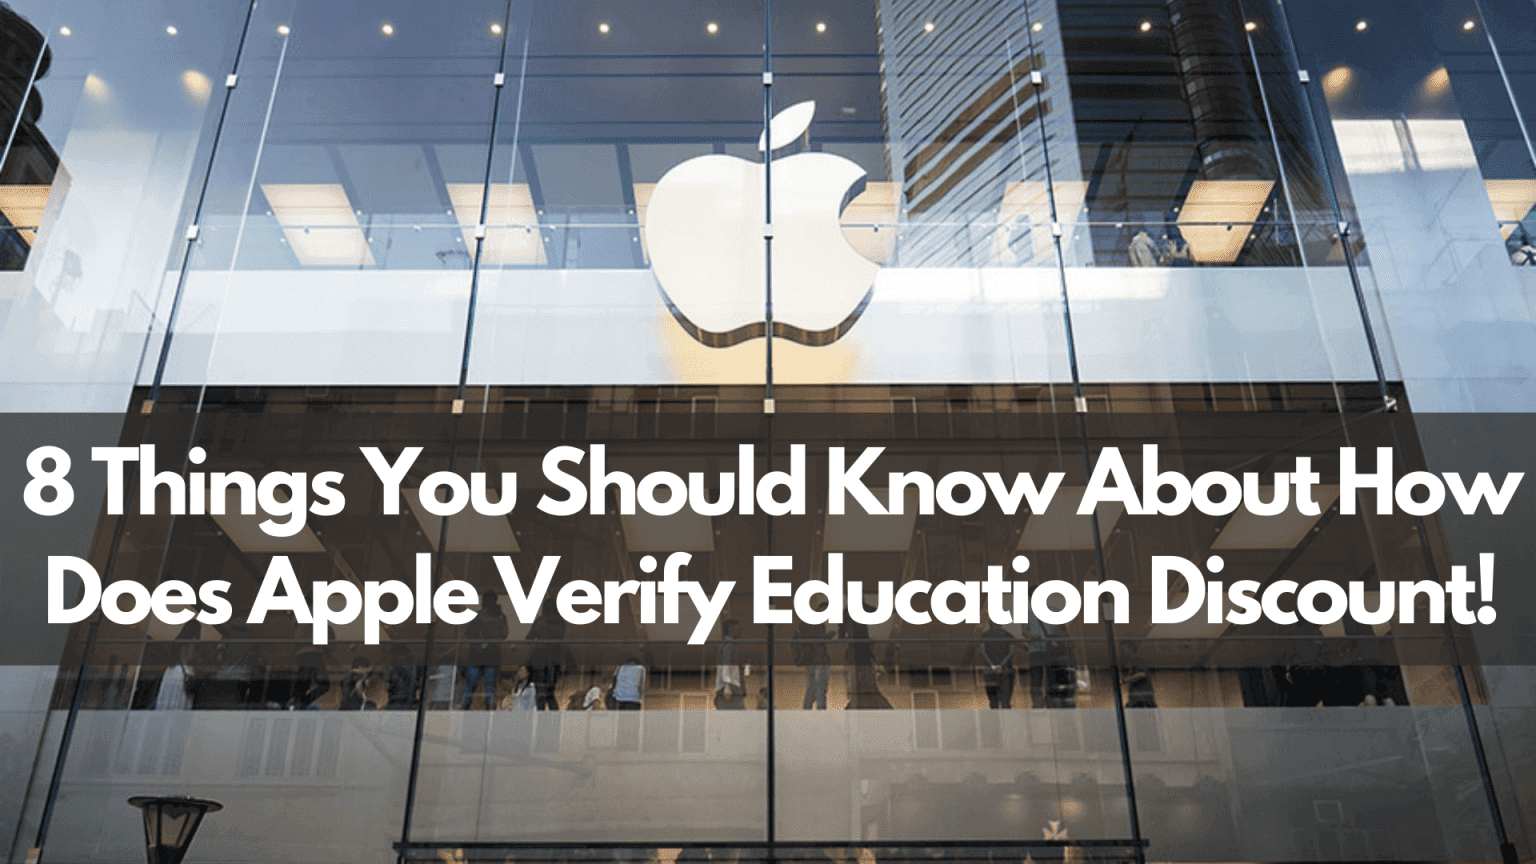 8-things-you-should-know-about-how-does-apple-verify-education-discount